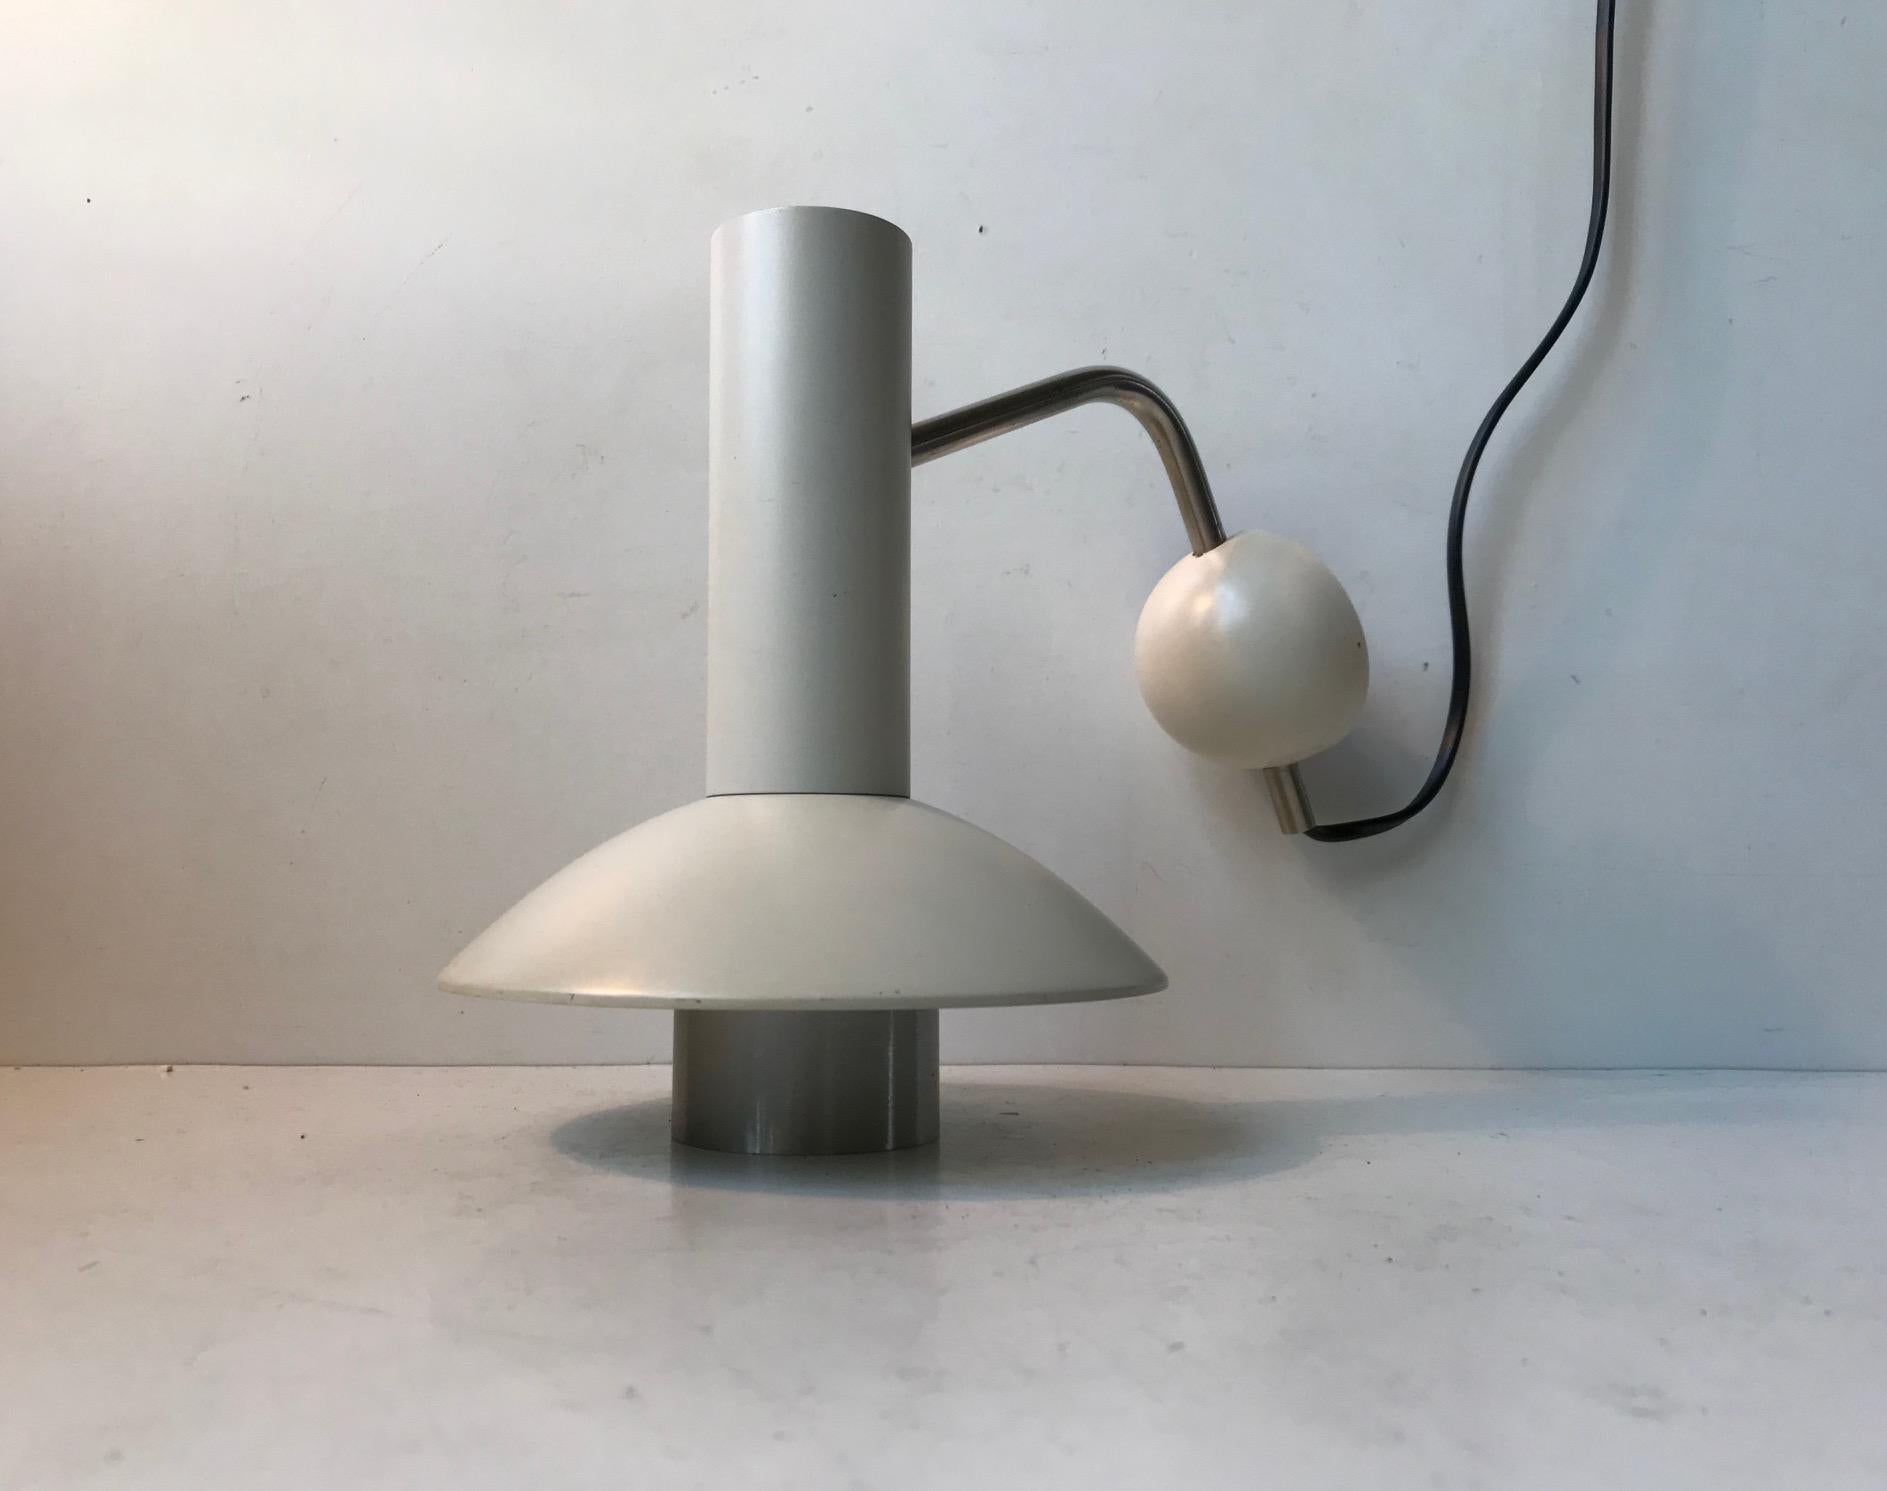 A rare white wall light designed and manufactured by Louis Poulsen in Denmark during the 1970s. This model - 132051 is called 'Louise' and is obviously derived from Louis in Louis Poulsen. Its fully adjustable - up/down and side to side at the